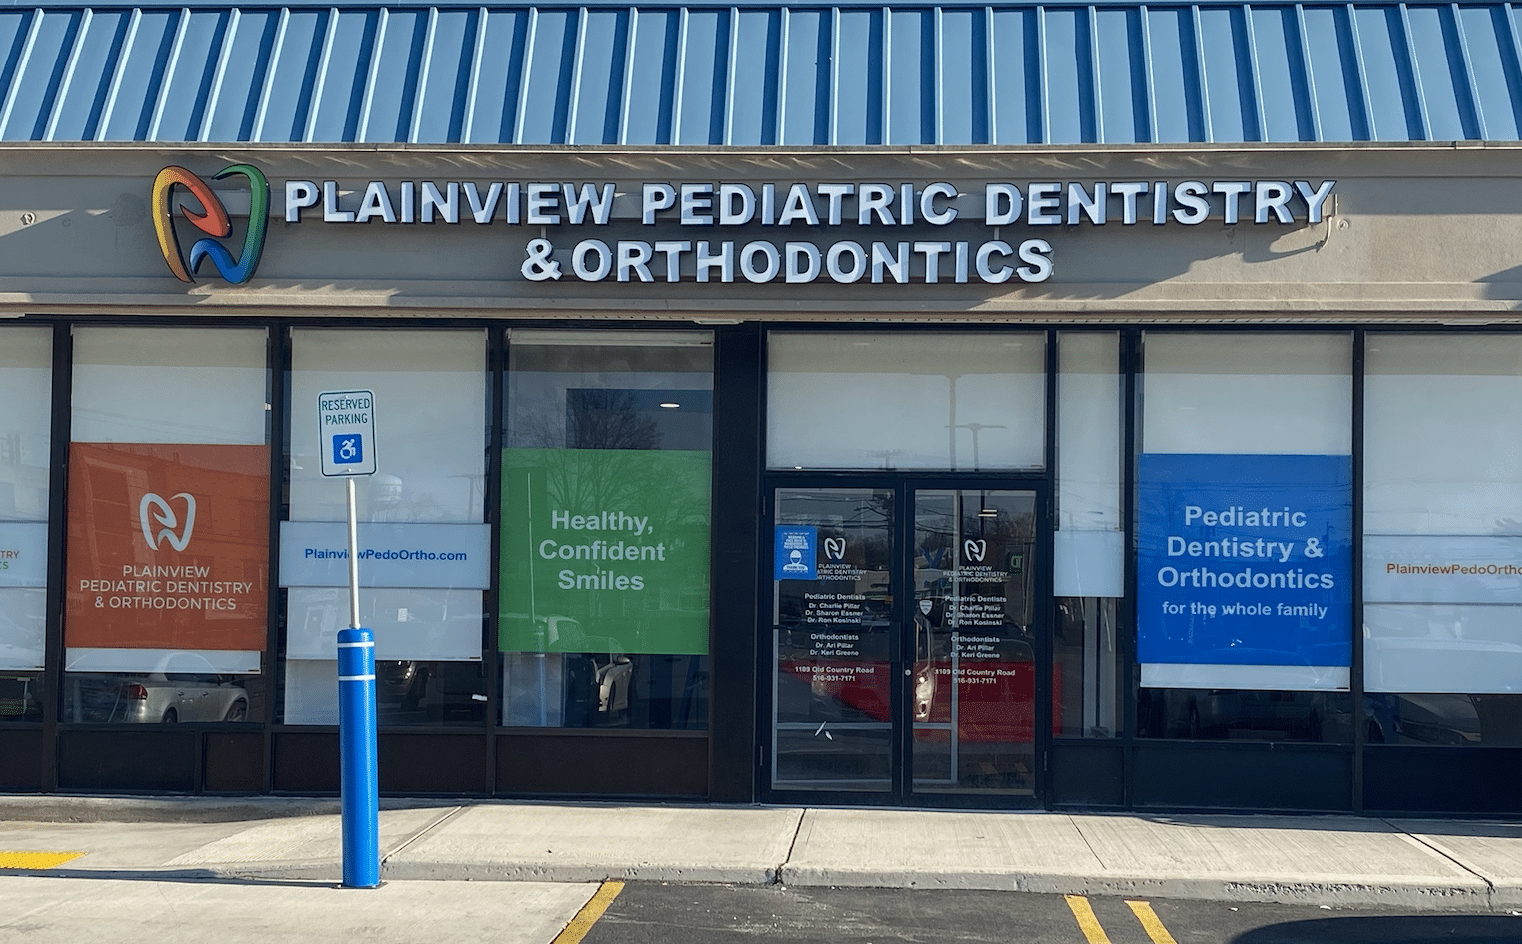 State-Of-The-Art Pediatric Dentistry & Orthodontics Practice Officially Open in Plainview, NY!